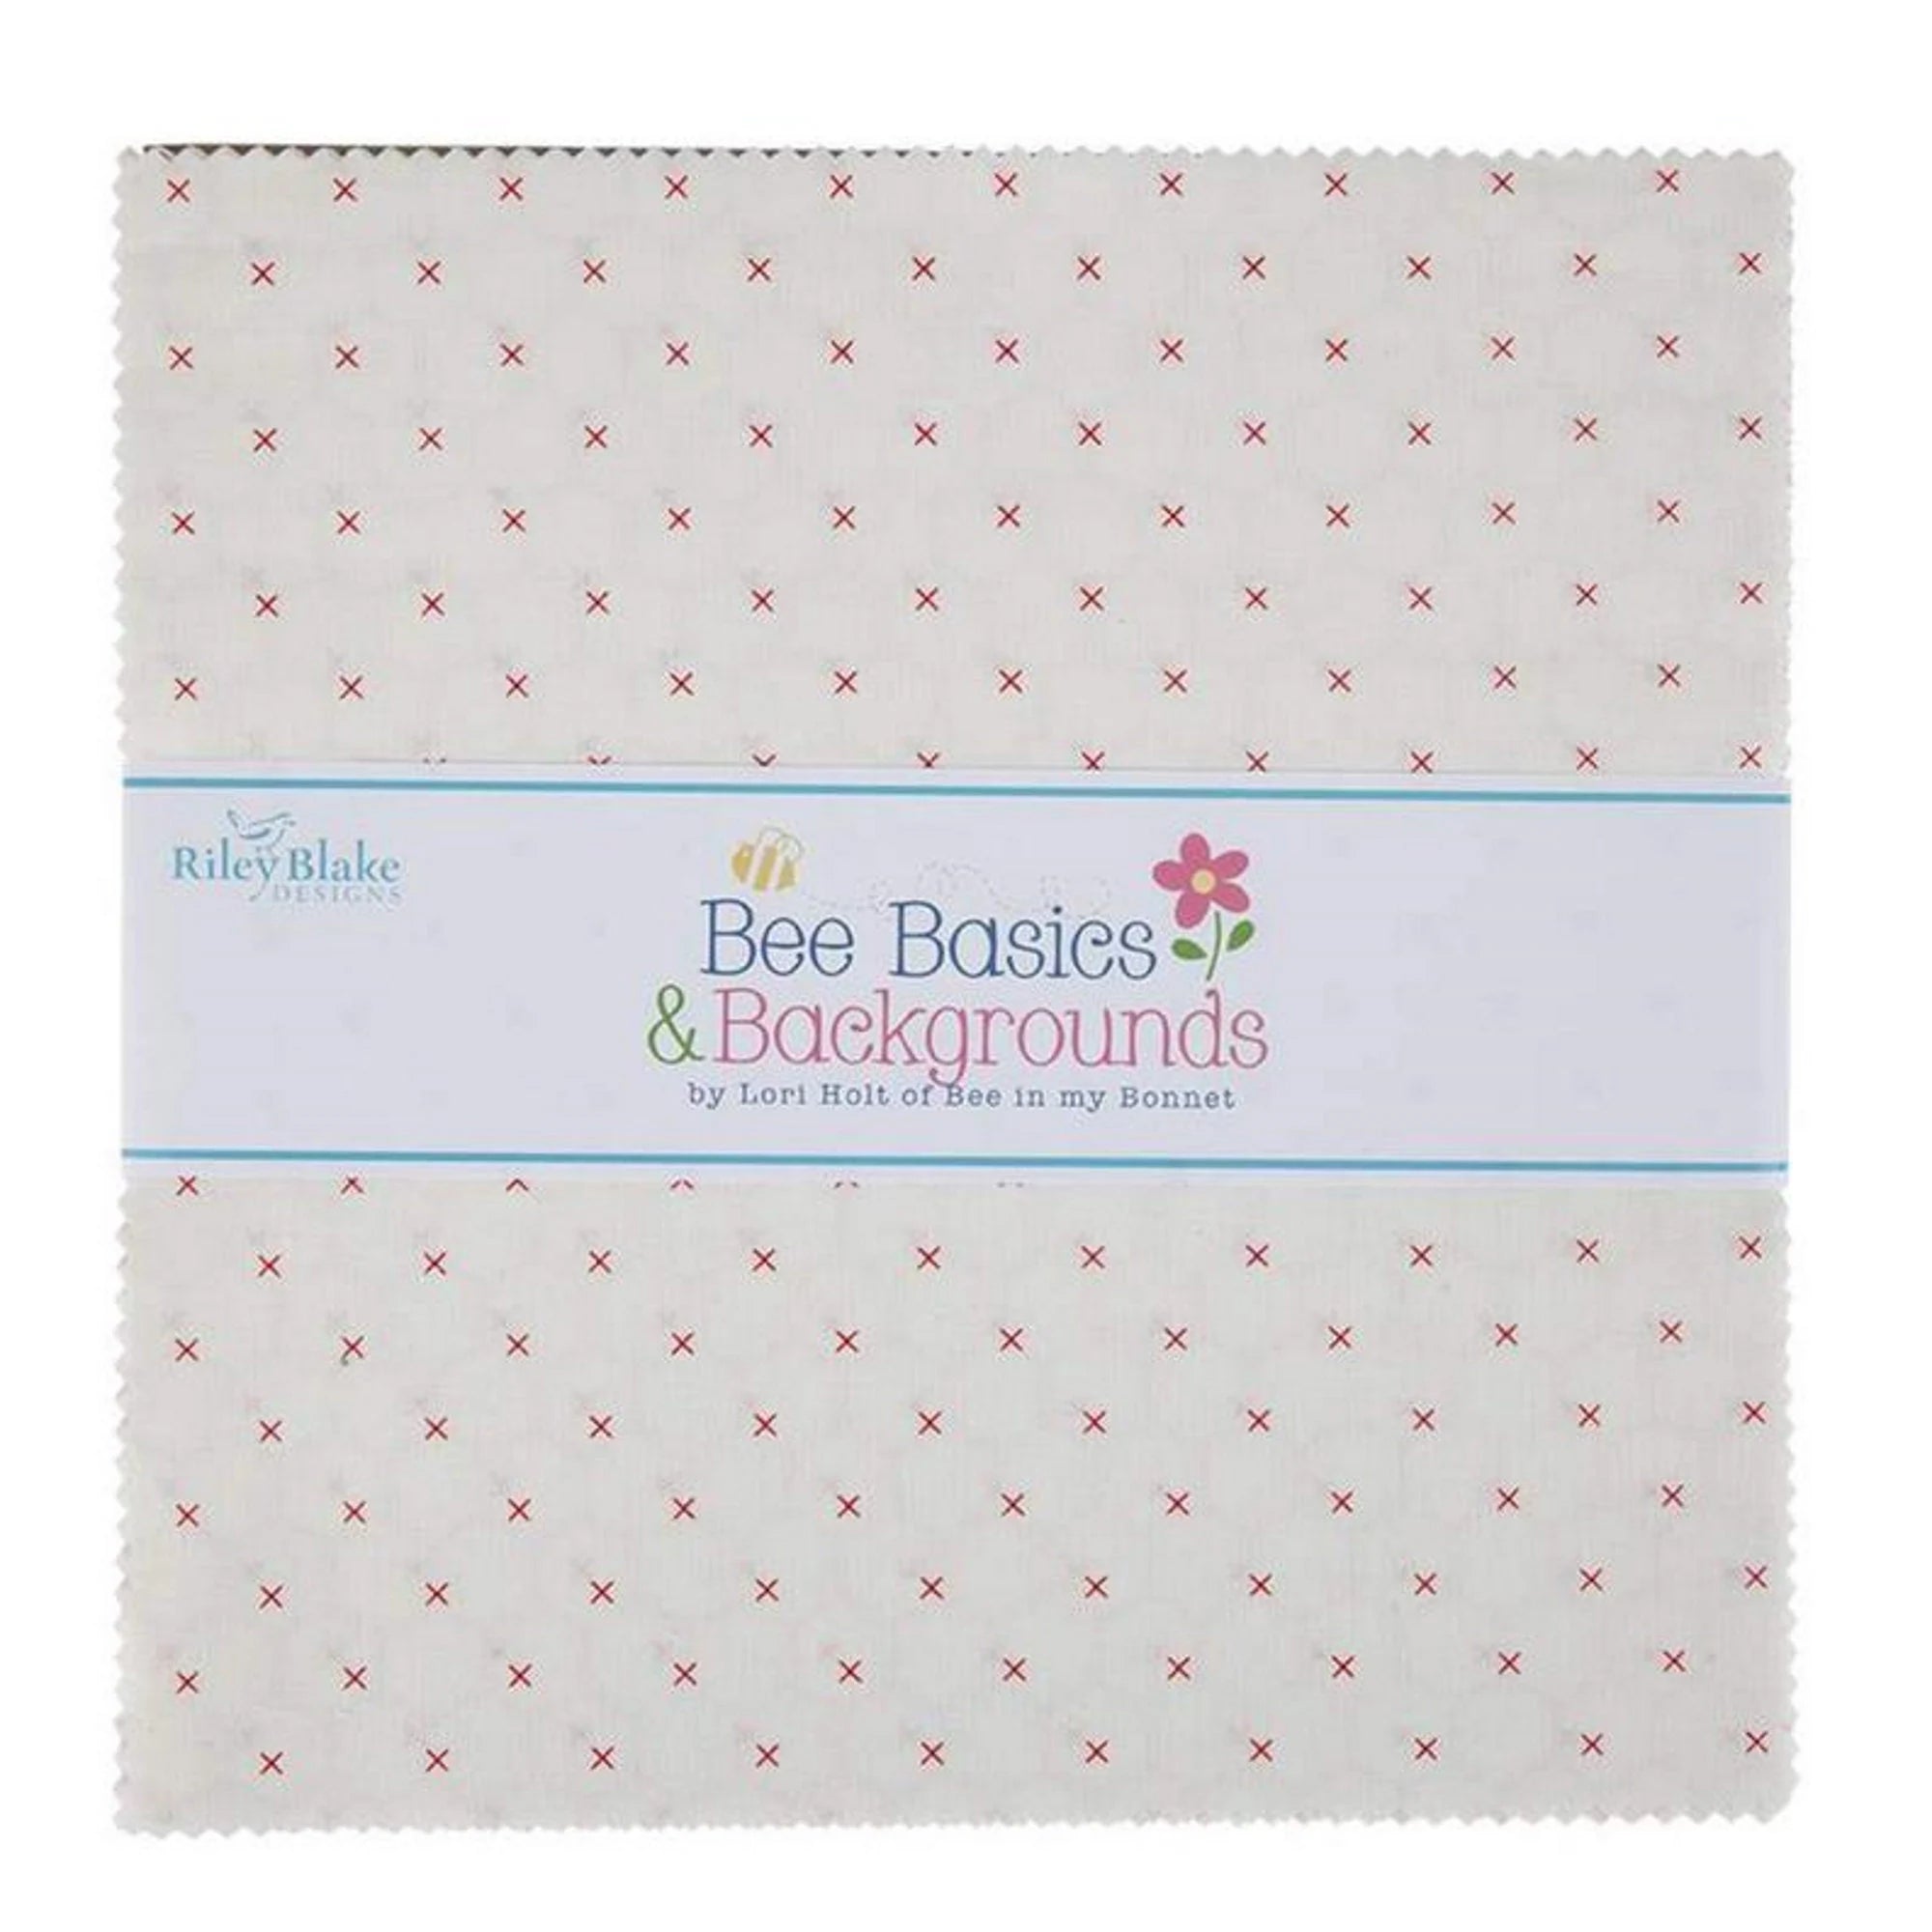 This pretty pack has fabrics that are lightly decorated in petite designs. White backgrounds with light blue, light green, light pink and light grey. Sweet designs that are related to sewing and vintage style! 